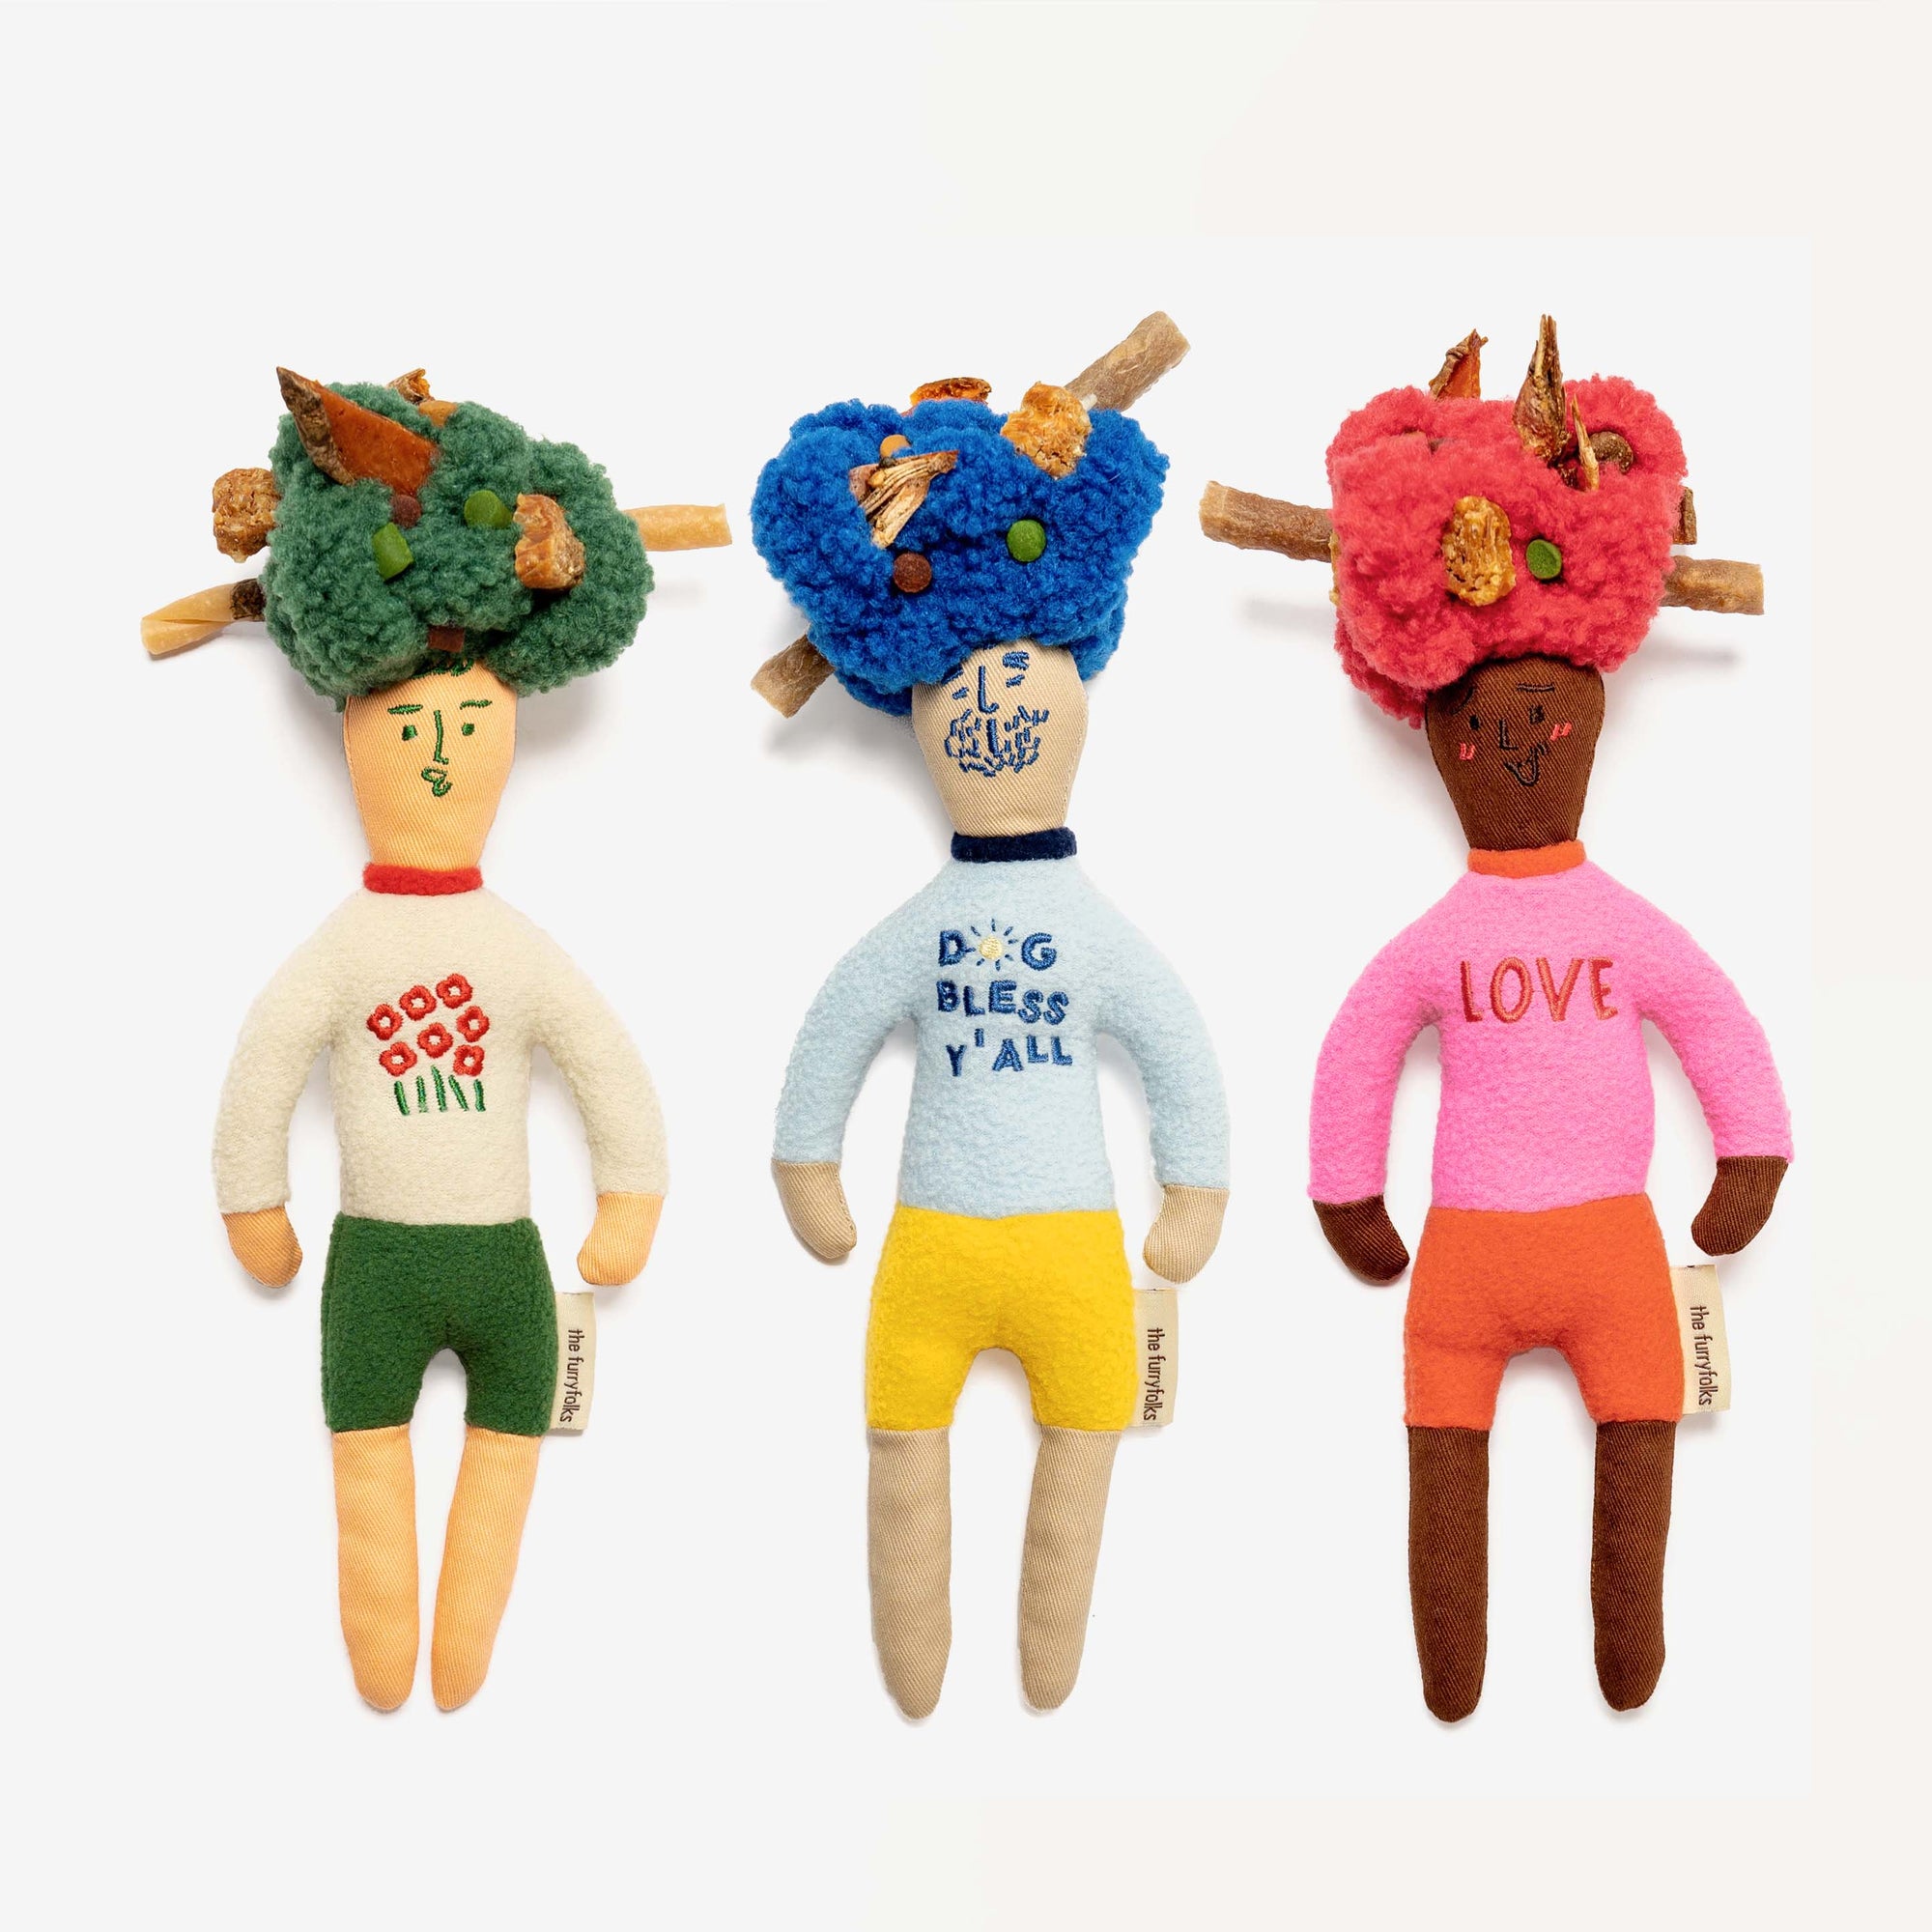 A collection of three human-shaped plush toys with colorful 'afro' hairstyles and shirts with phrases like 'Dog Bless Y'all' on a white surface.